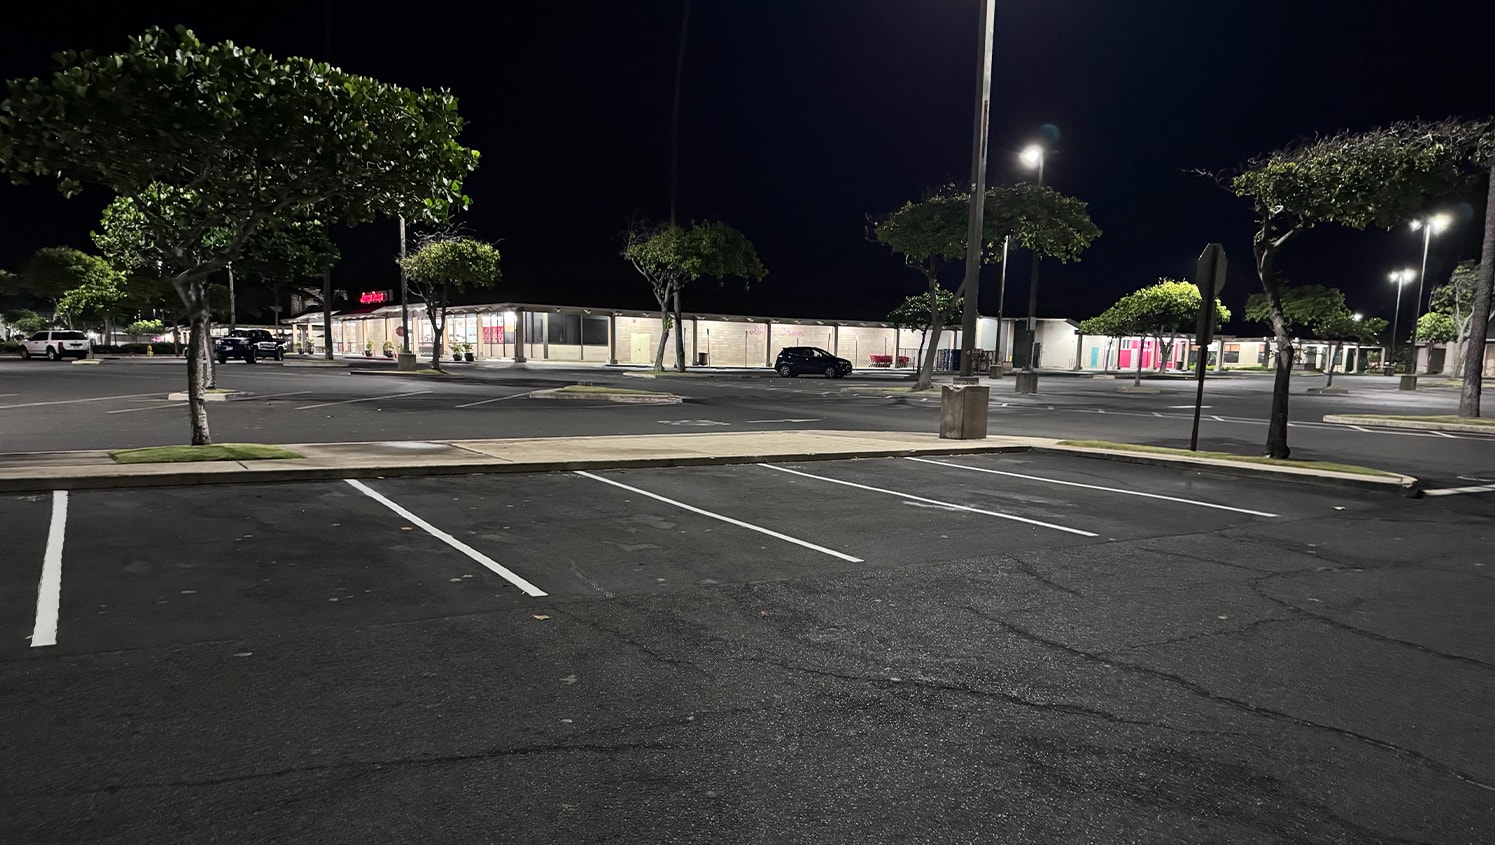 parking spots with freshly painted line markings for O'Reilly Auto Parts